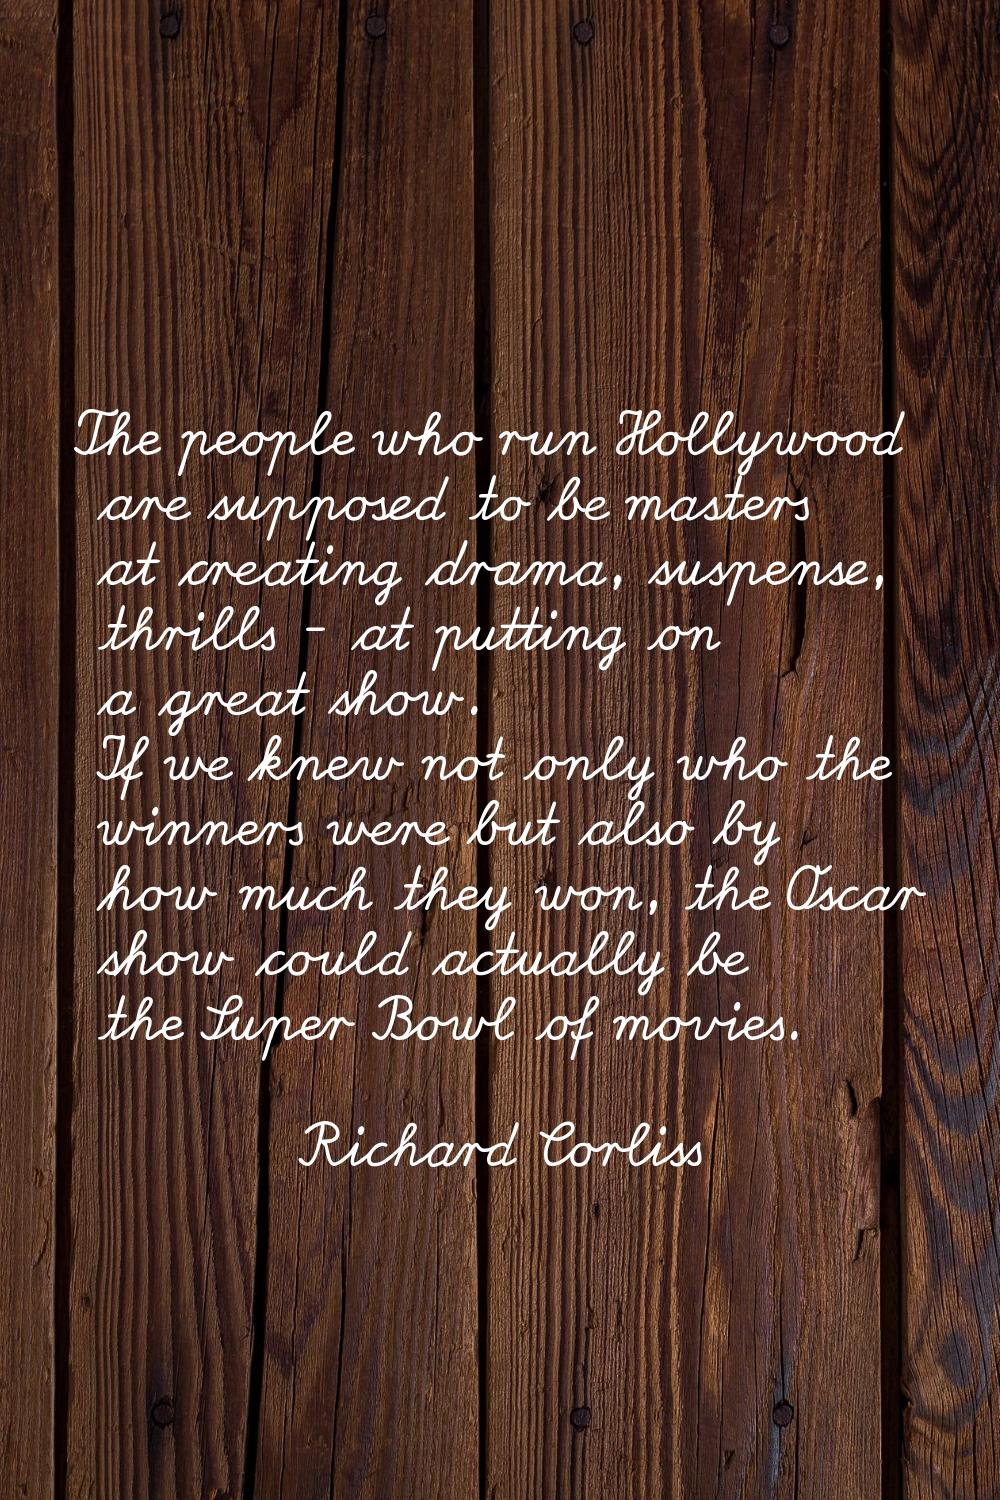 The people who run Hollywood are supposed to be masters at creating drama, suspense, thrills - at p